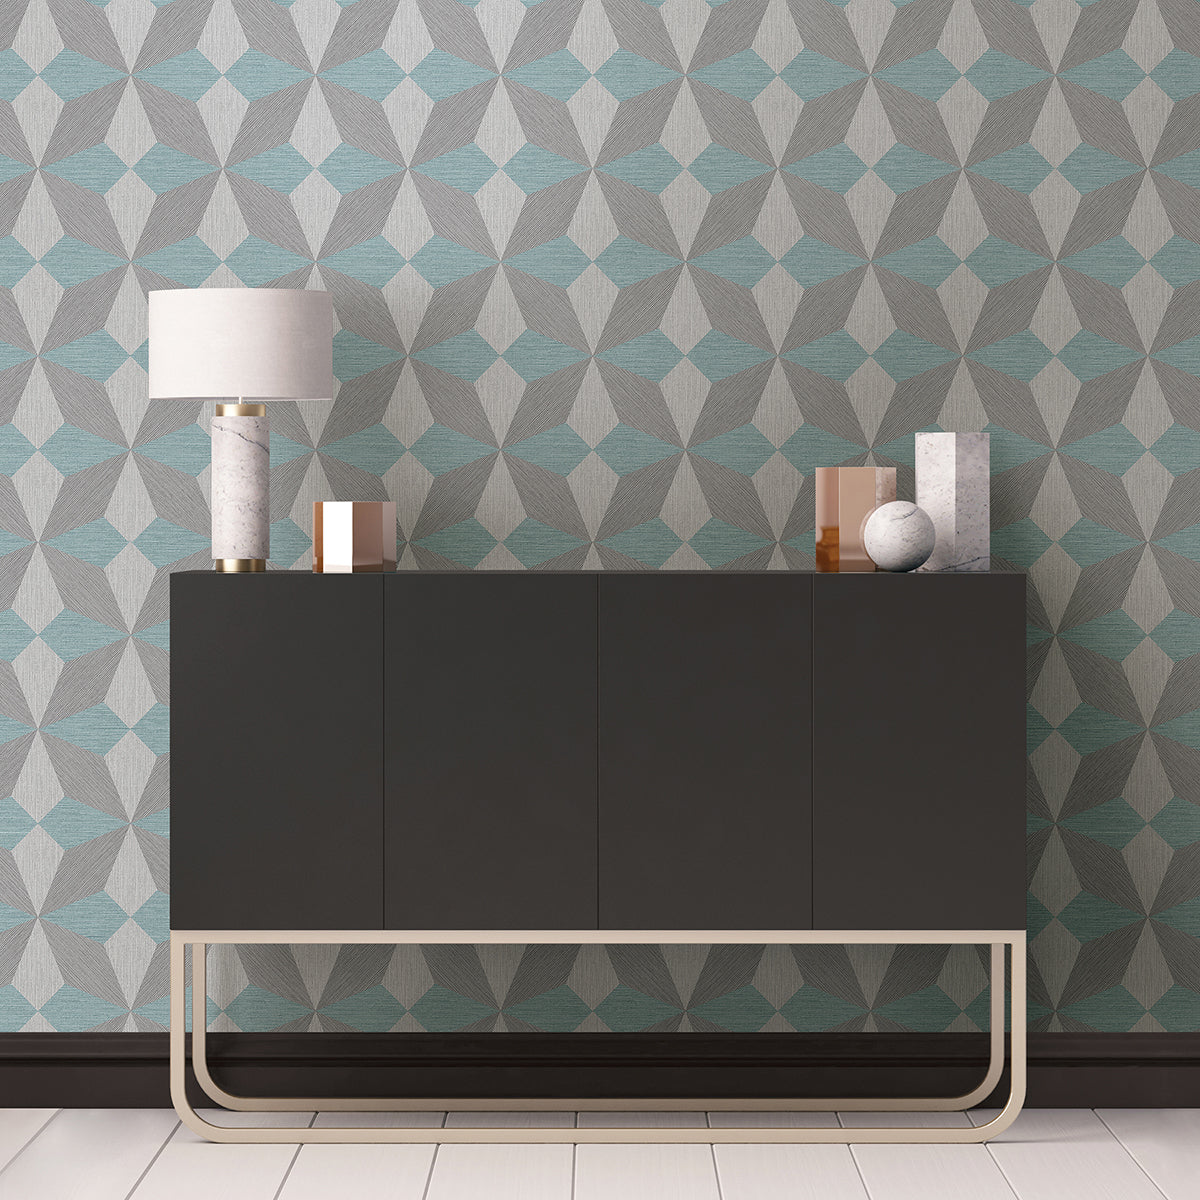 Valiant Light Blue Faux Grasscloth Mosaic Wallpaper  | Brewster Wallcovering - The WorkRm